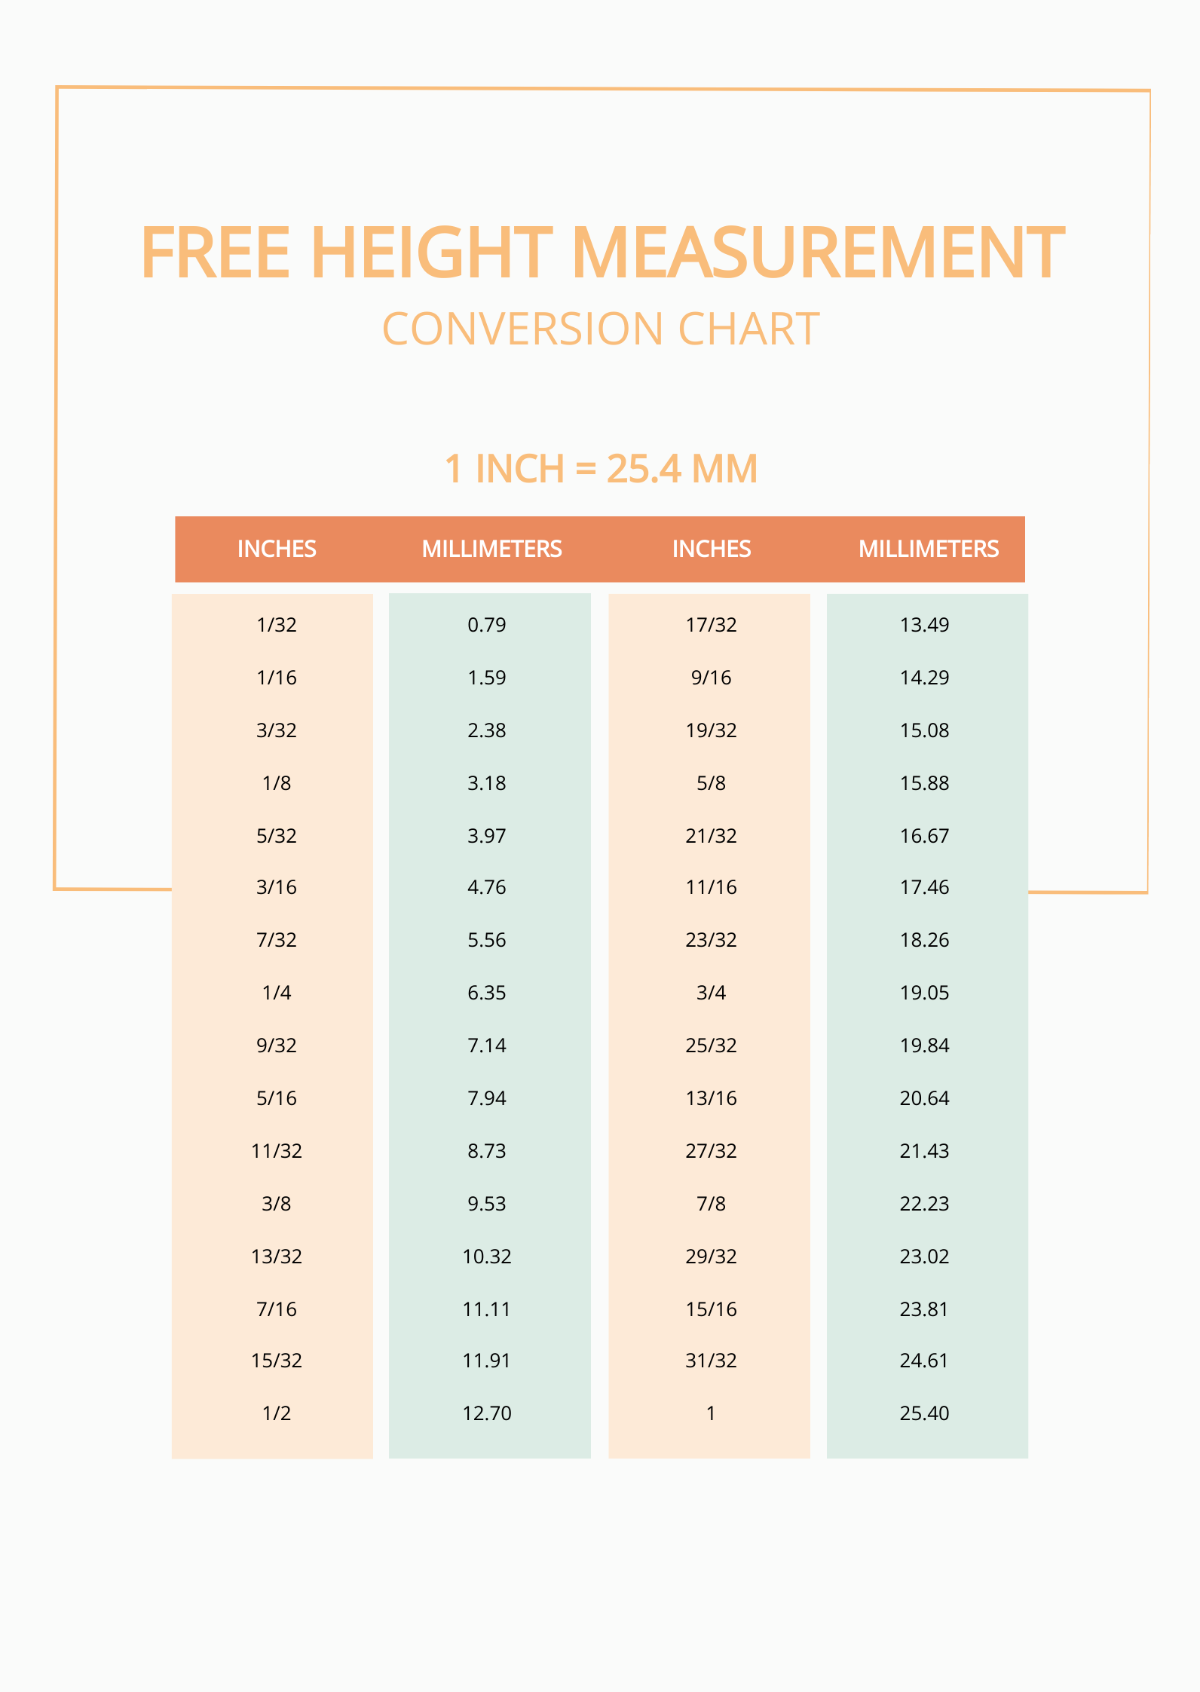 Height Measurement Conversion Chart Template - Edit Online & Download  Example